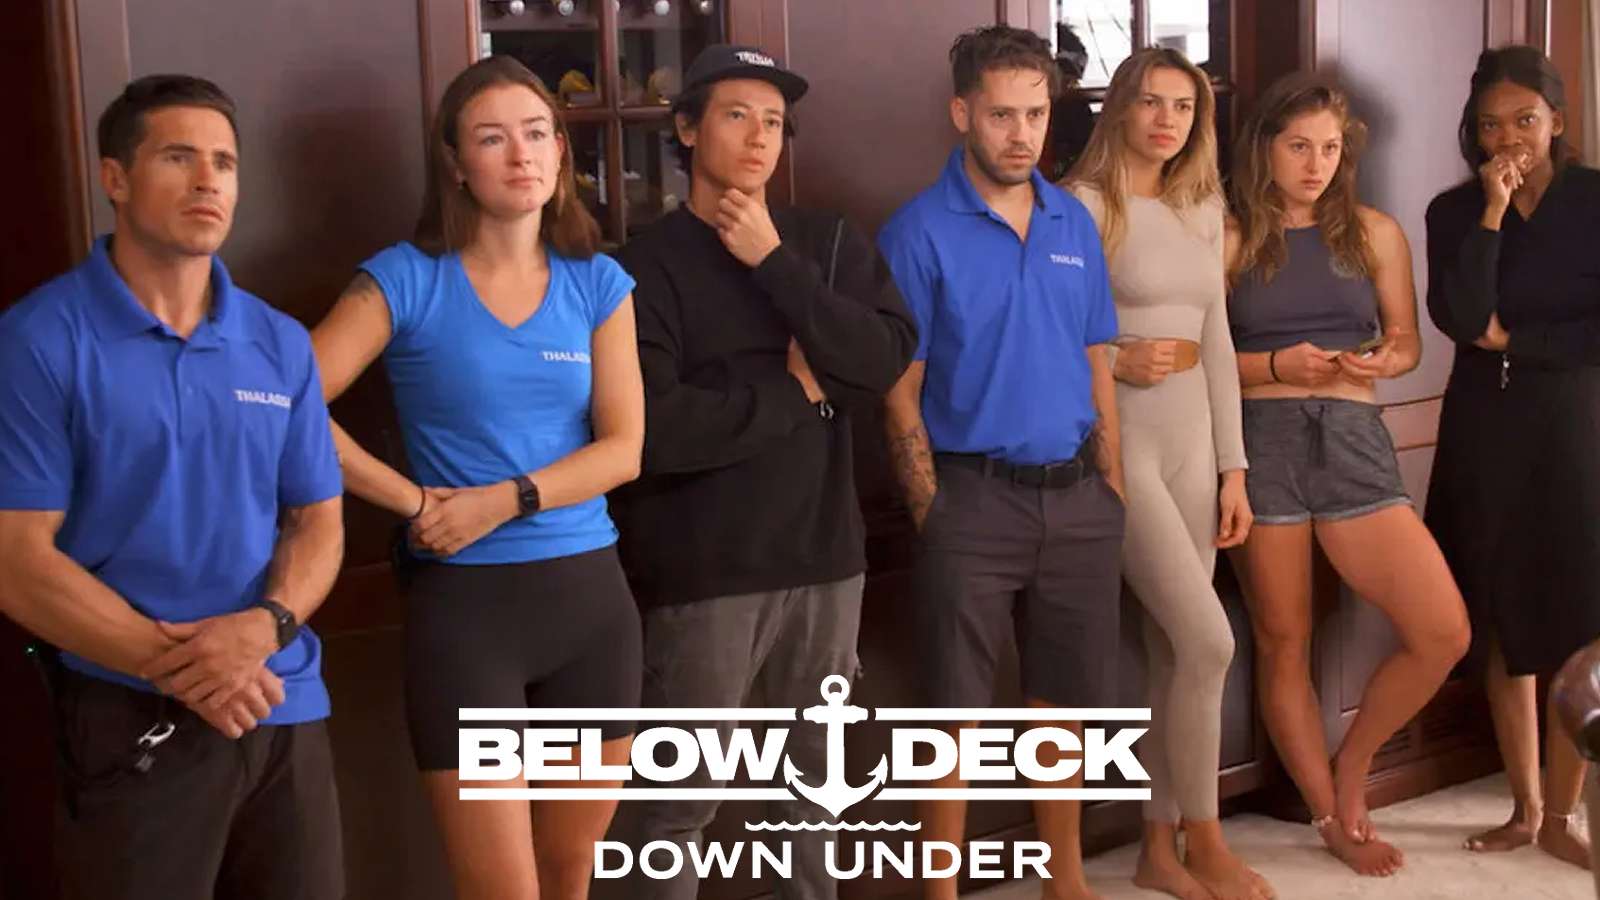 What happened to the Below Deck Down Under season 1 reunion